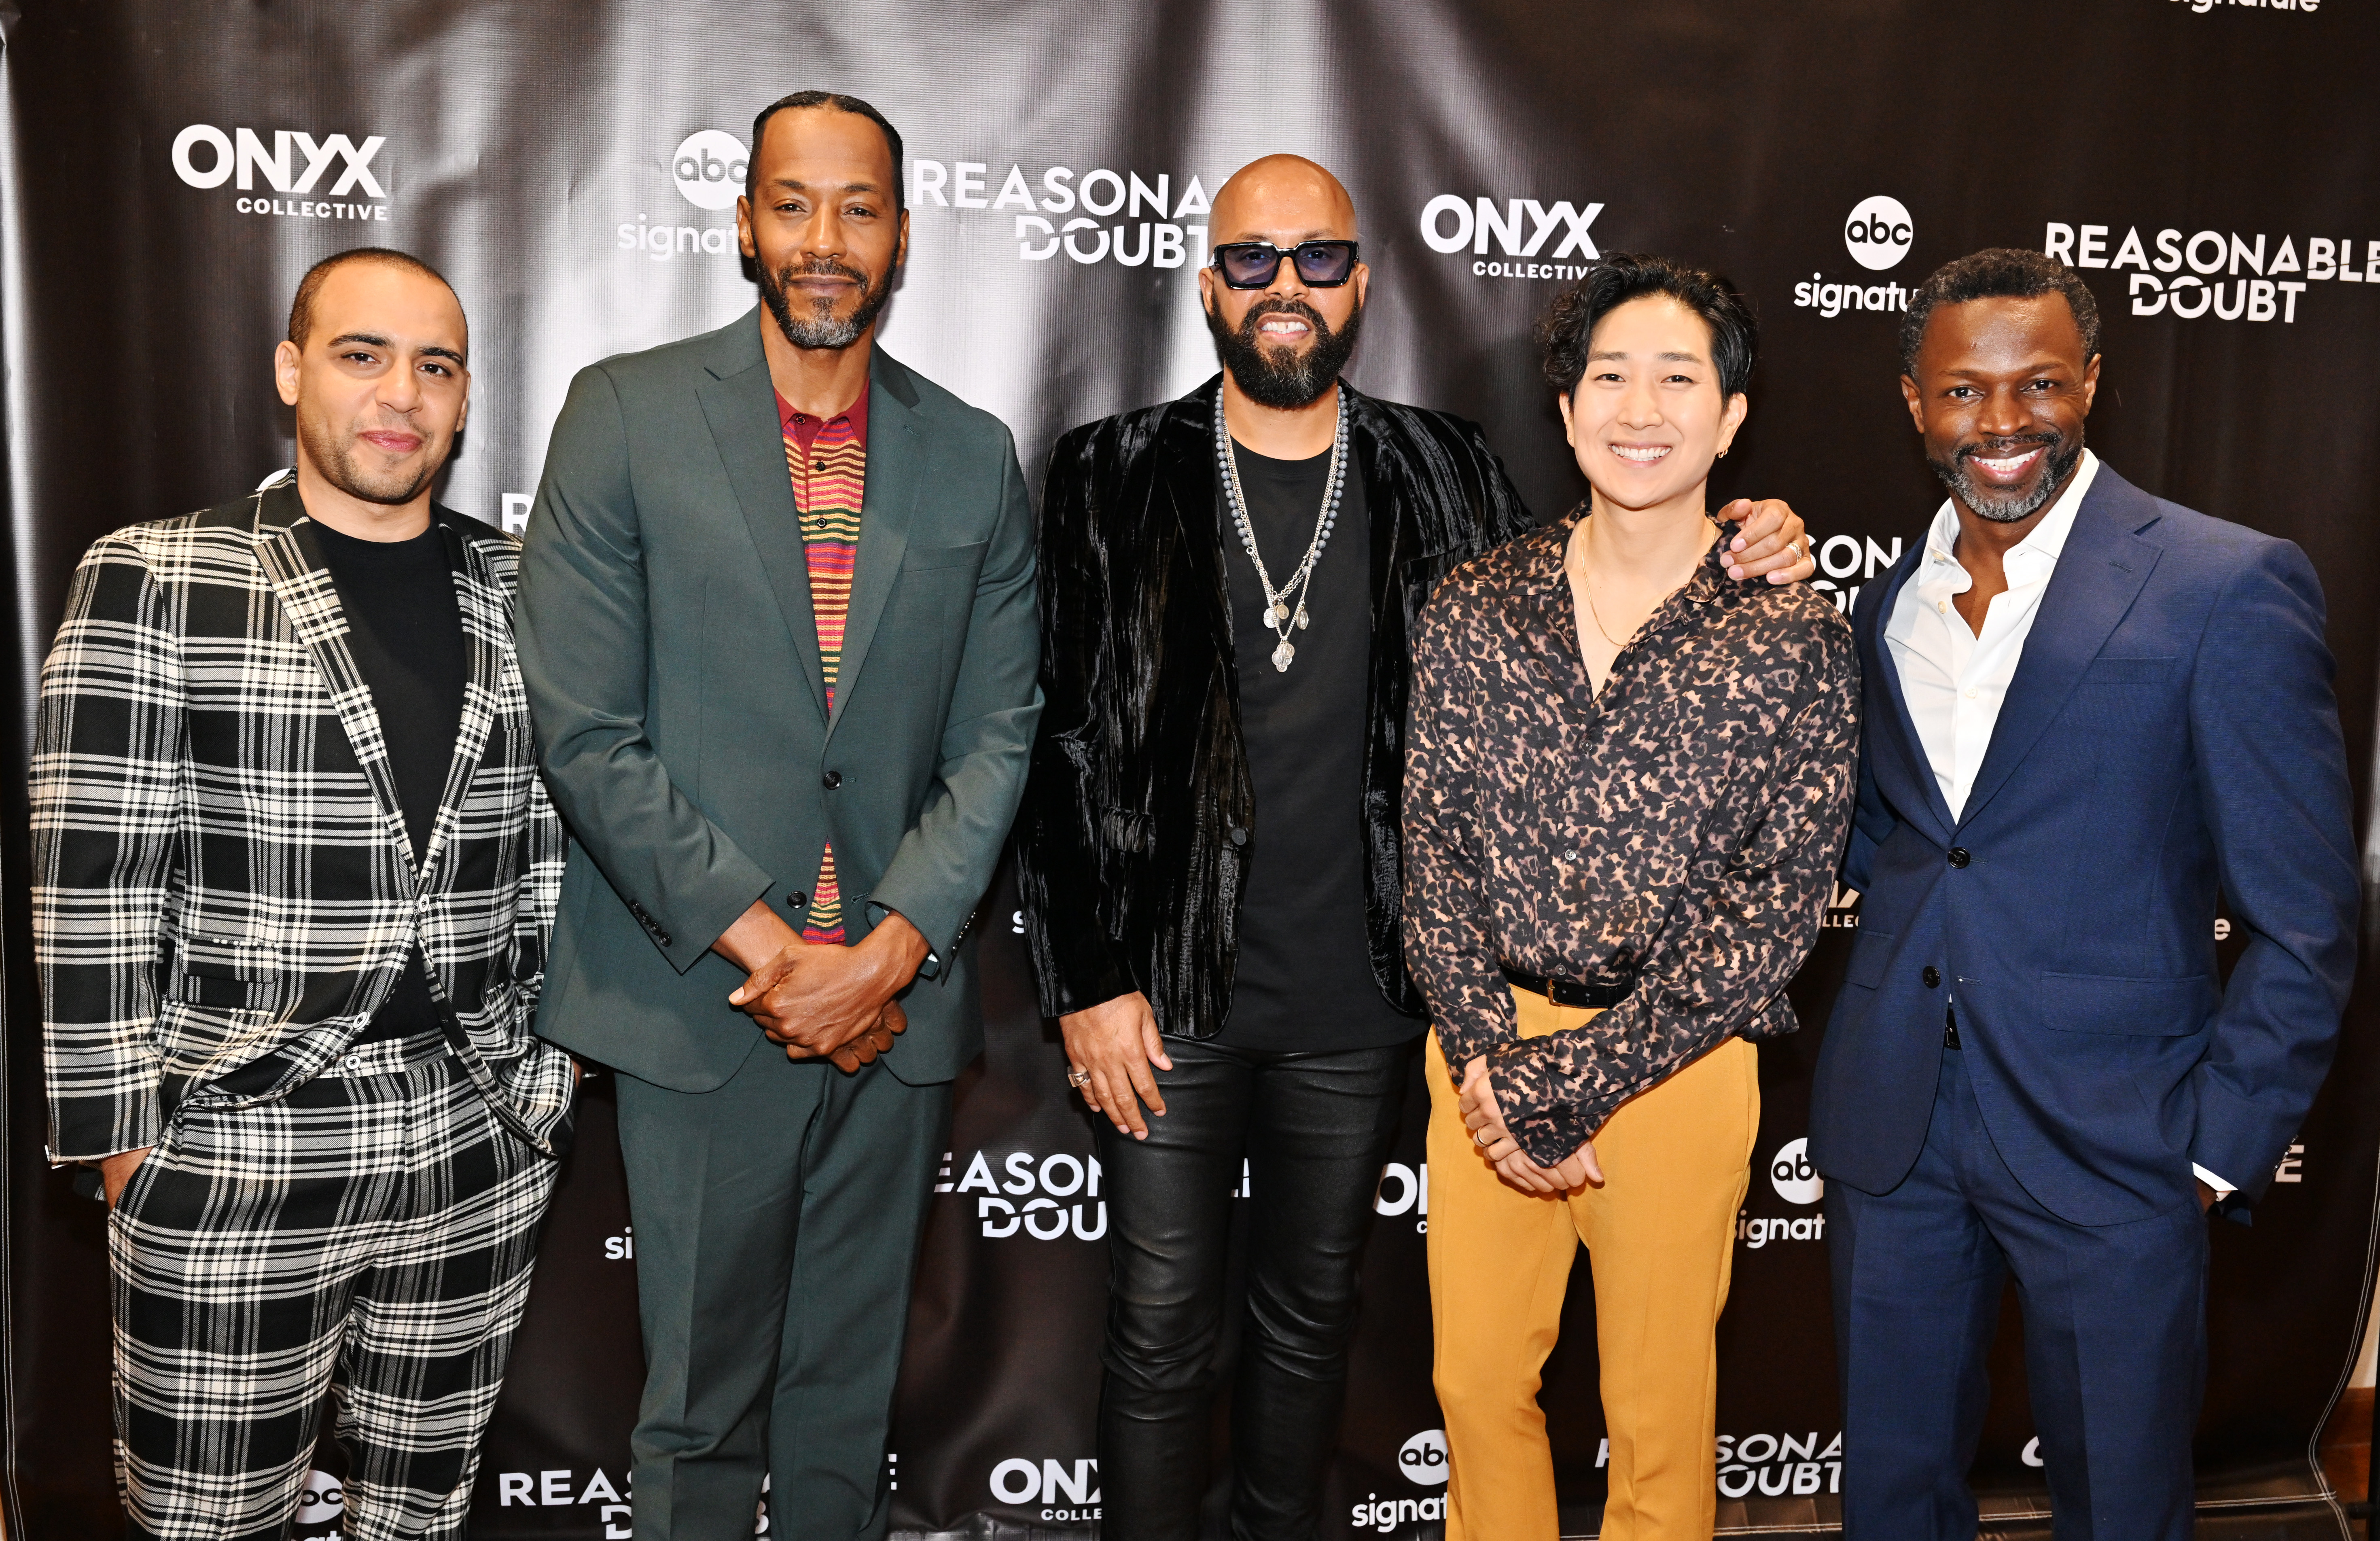 AAFCA Hosts Private Screening And Roundtable  Discussion With The Cast Of Onyx Collective's Reasonable Doubt